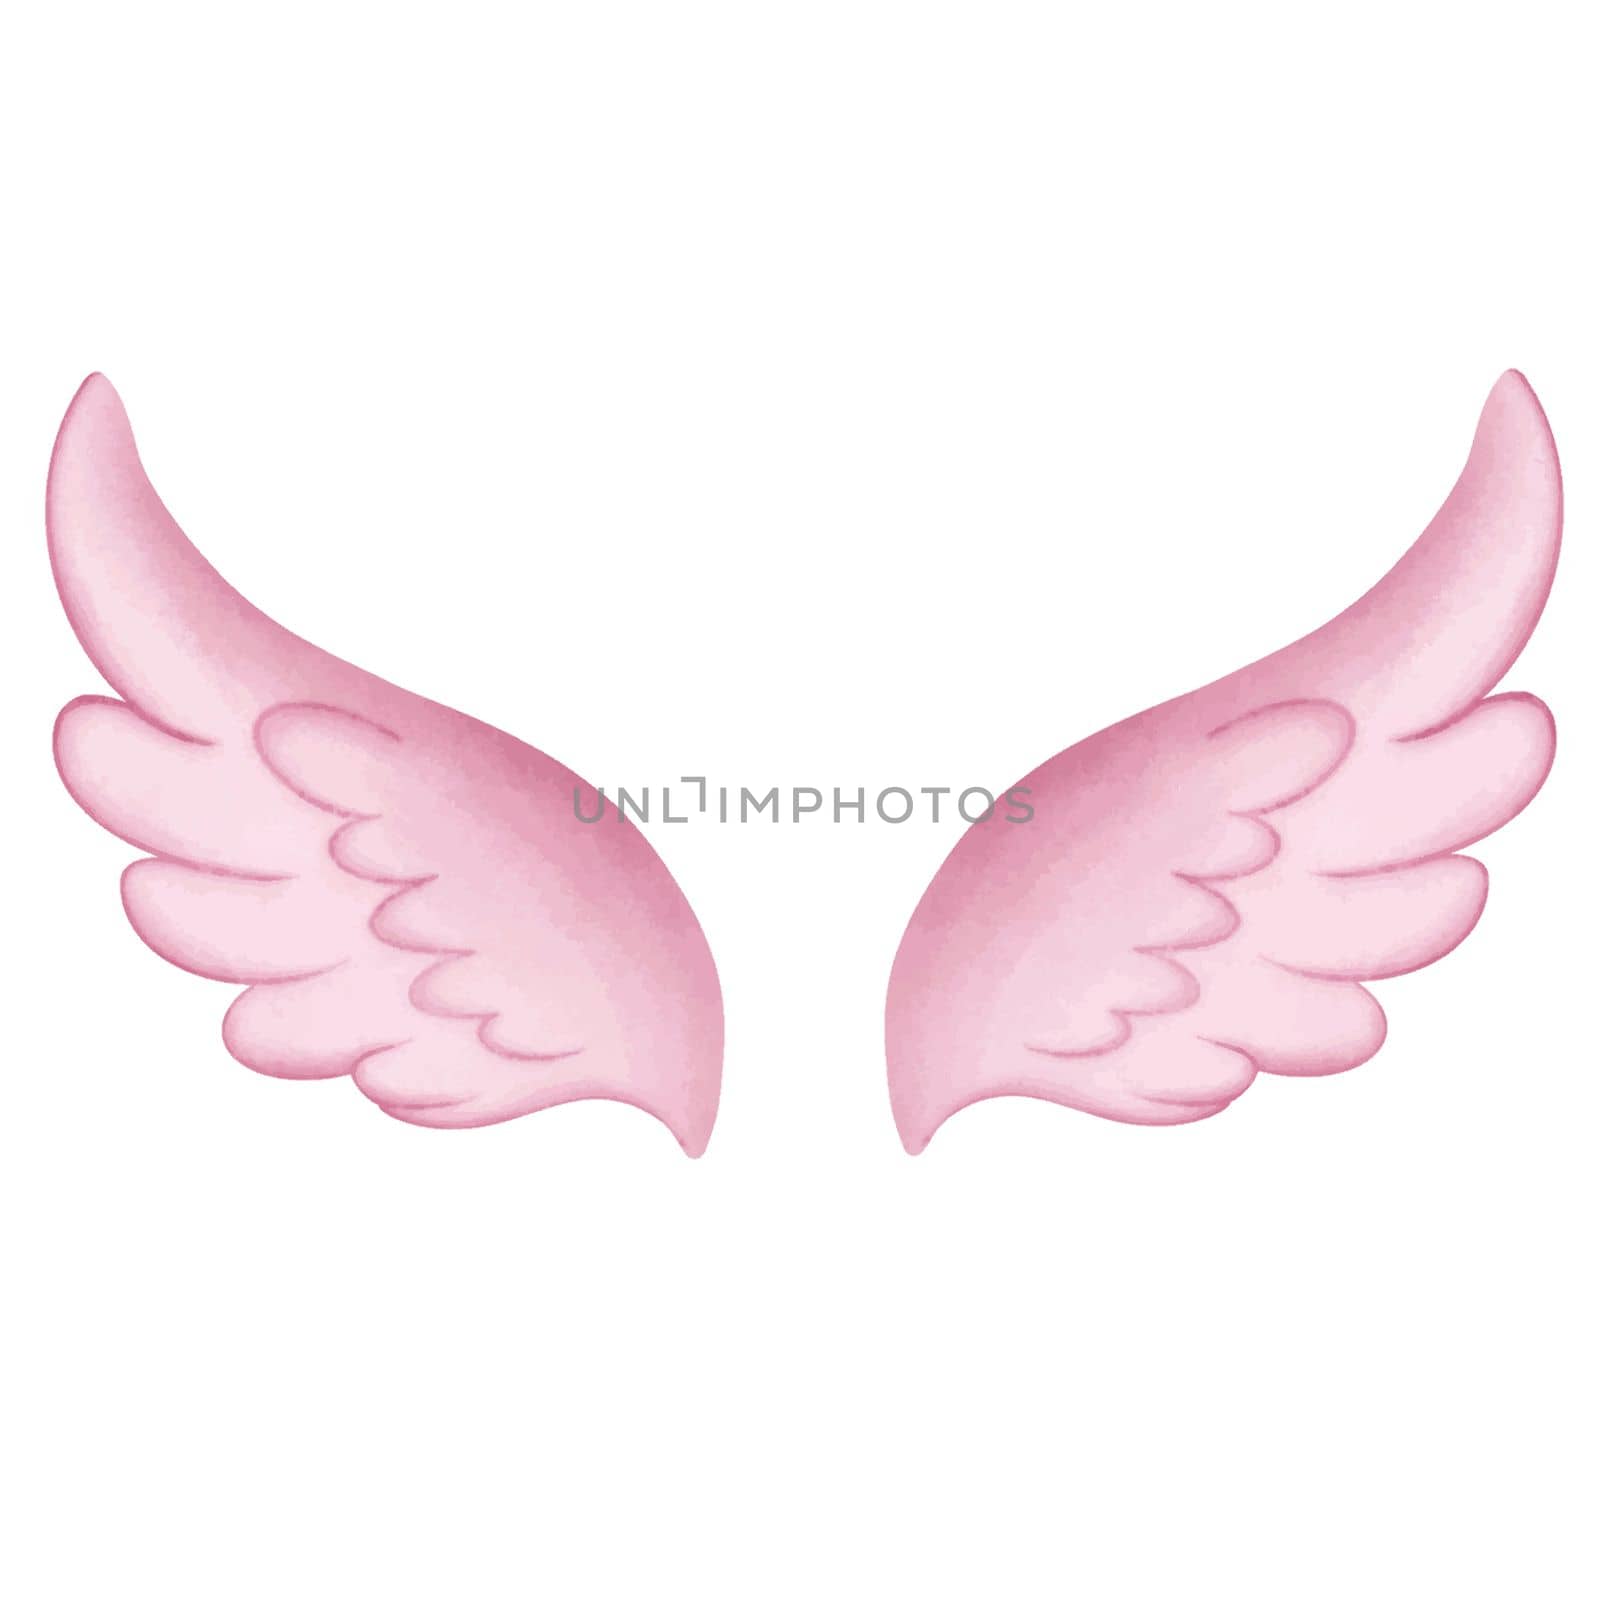 Pink Angel Wings Watercolor Clipart PNG . Paris In Love with pink pastel wings for cupid, angels, love bird watercolor illustration.